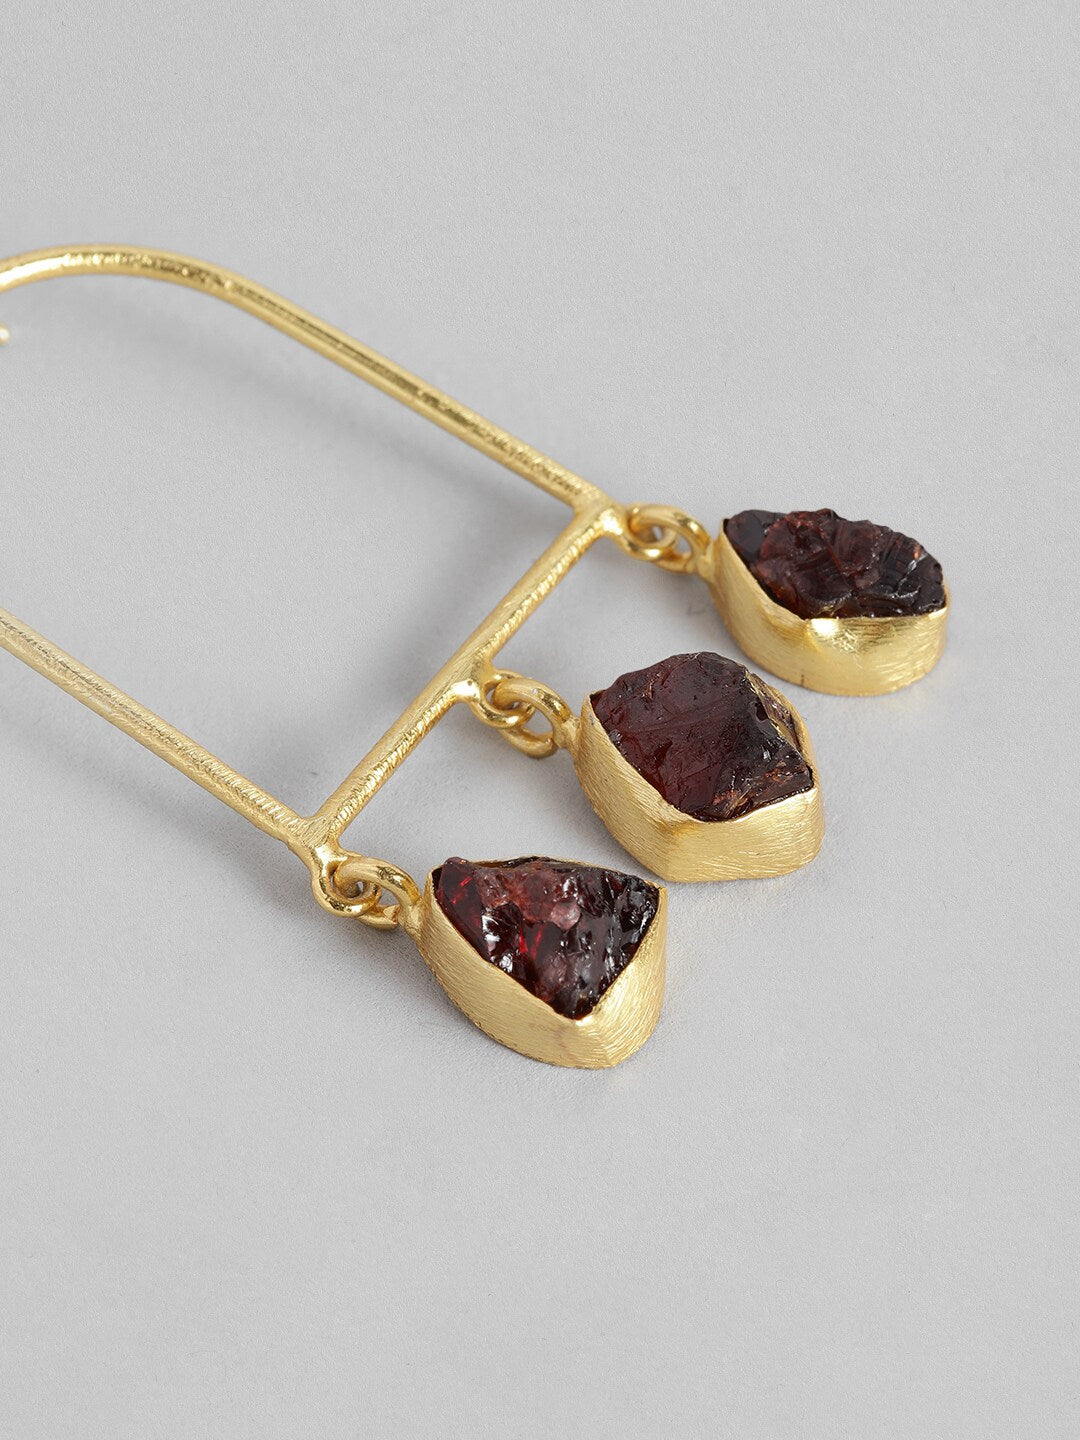 EL REGALO Gold-Toned & Red Geometric Drop Earrings - for Women and Girls
Style ID: 16287430